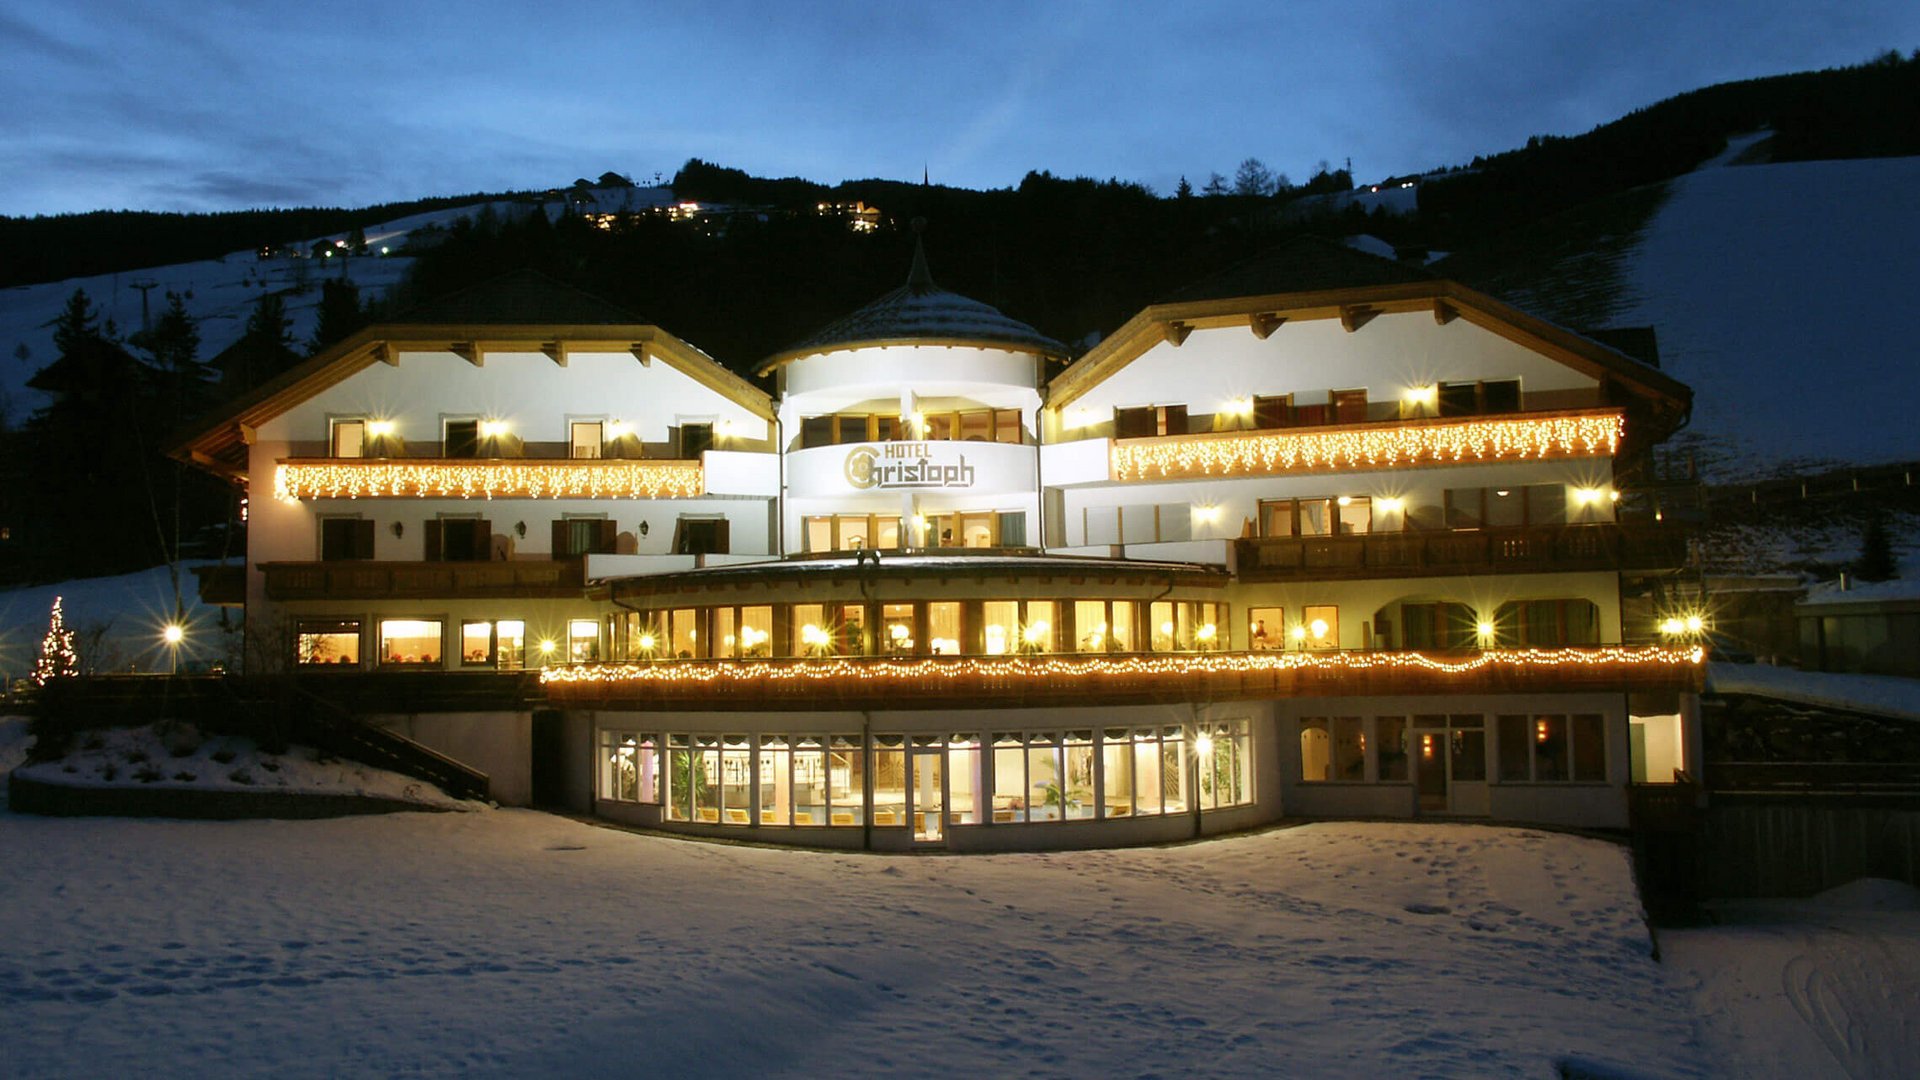 Reviews of our hotel in Val Pusteria/Pustertal with 4 stars